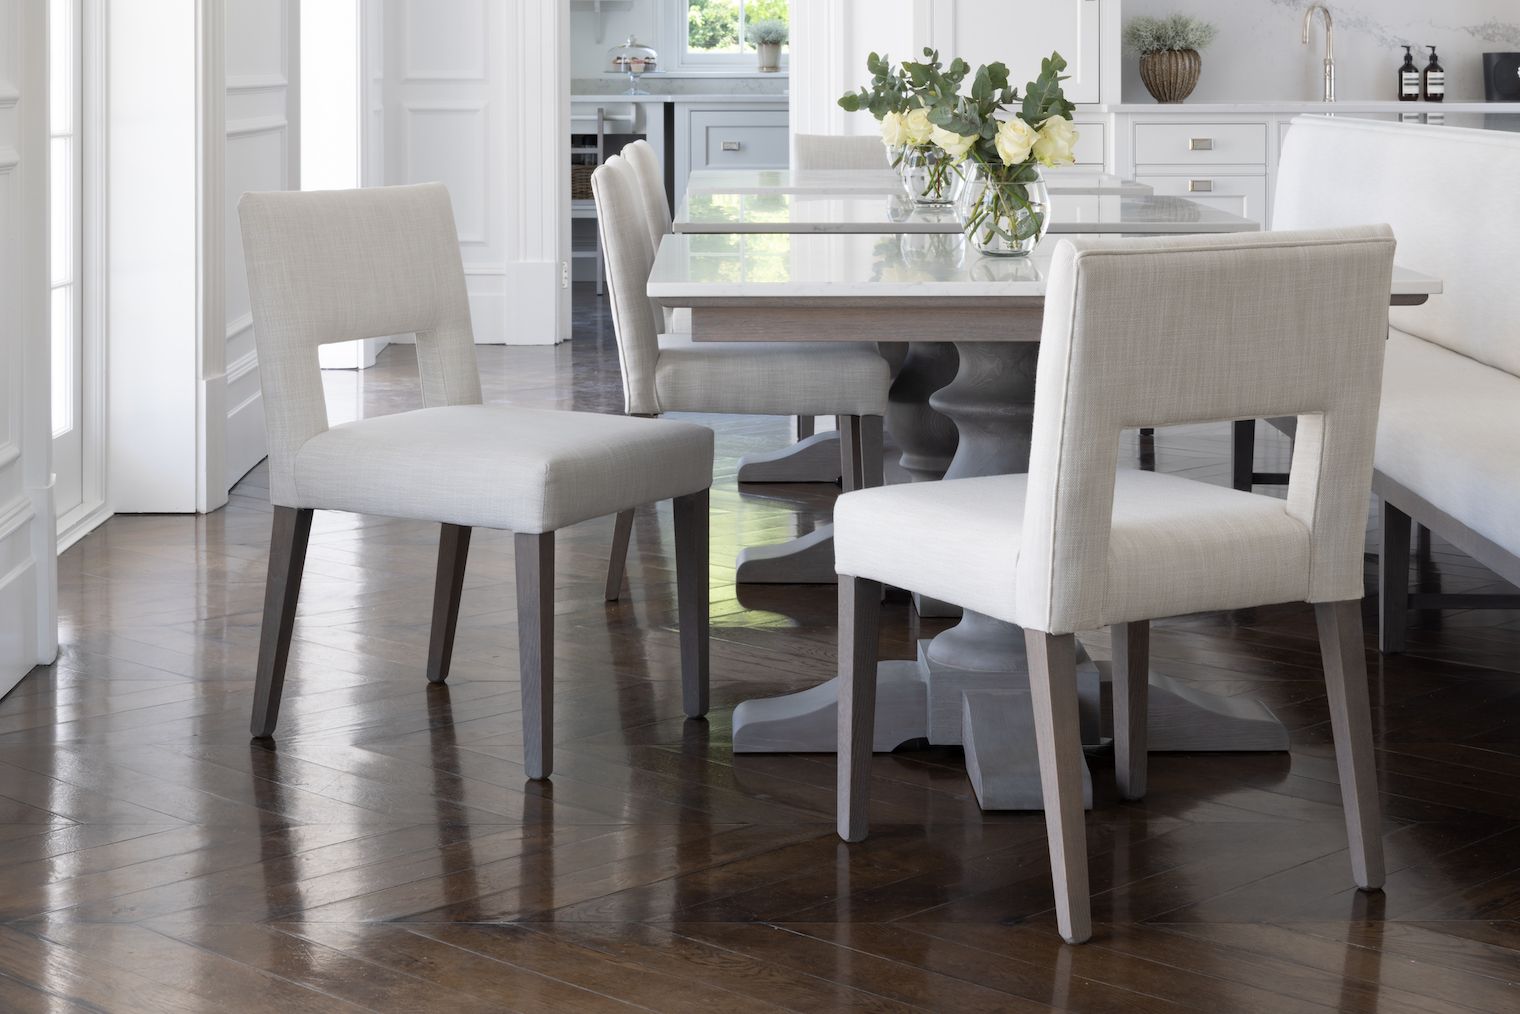 The Epitome of HM Style & Comfort | Introducing the Langham Square Table & Bentley Dining Chairs